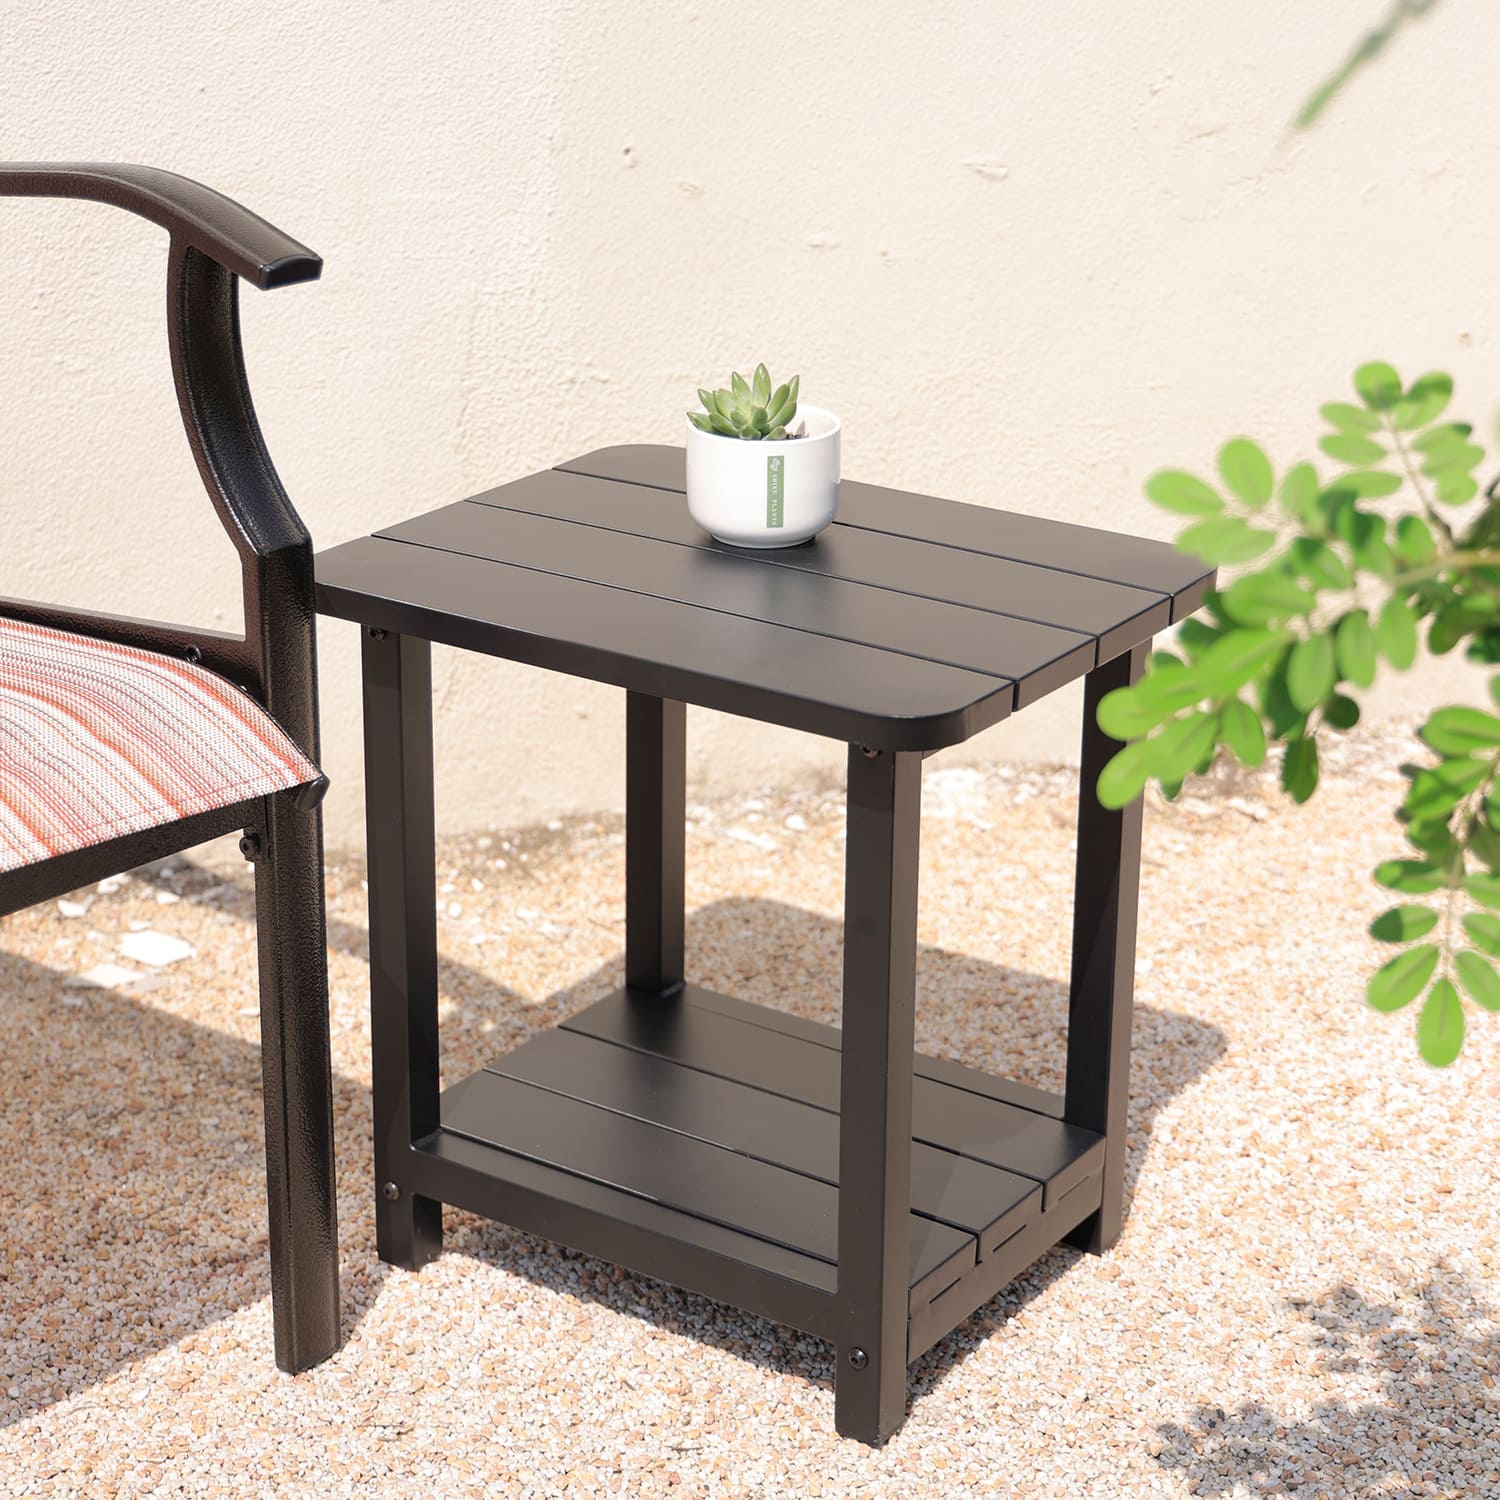 outdoor side table black white blue patio side table rectangular metal small outdoor side table outside table square metal outdoor side table outdoor side table with storage small patio side table round black metal outdoor side table